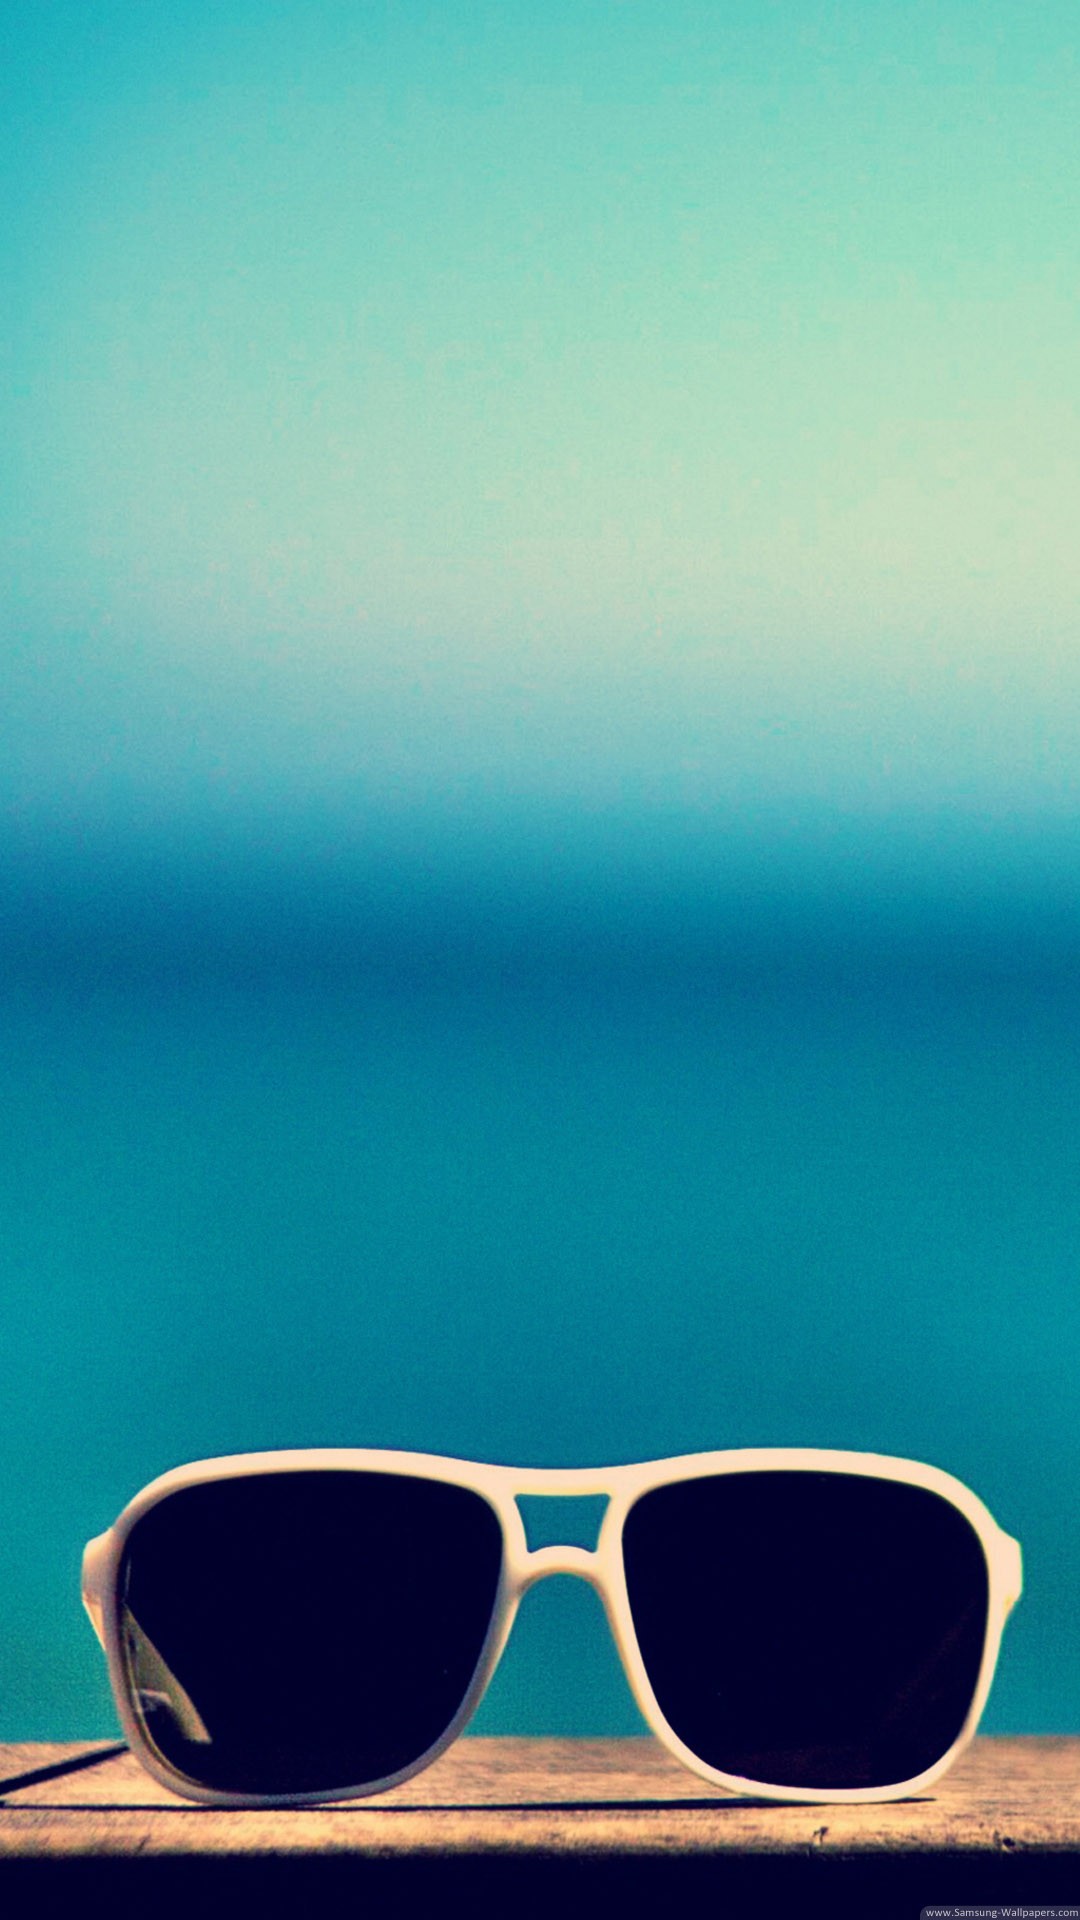 Nothing but iphone 6 hipster wallpaper would last forever from